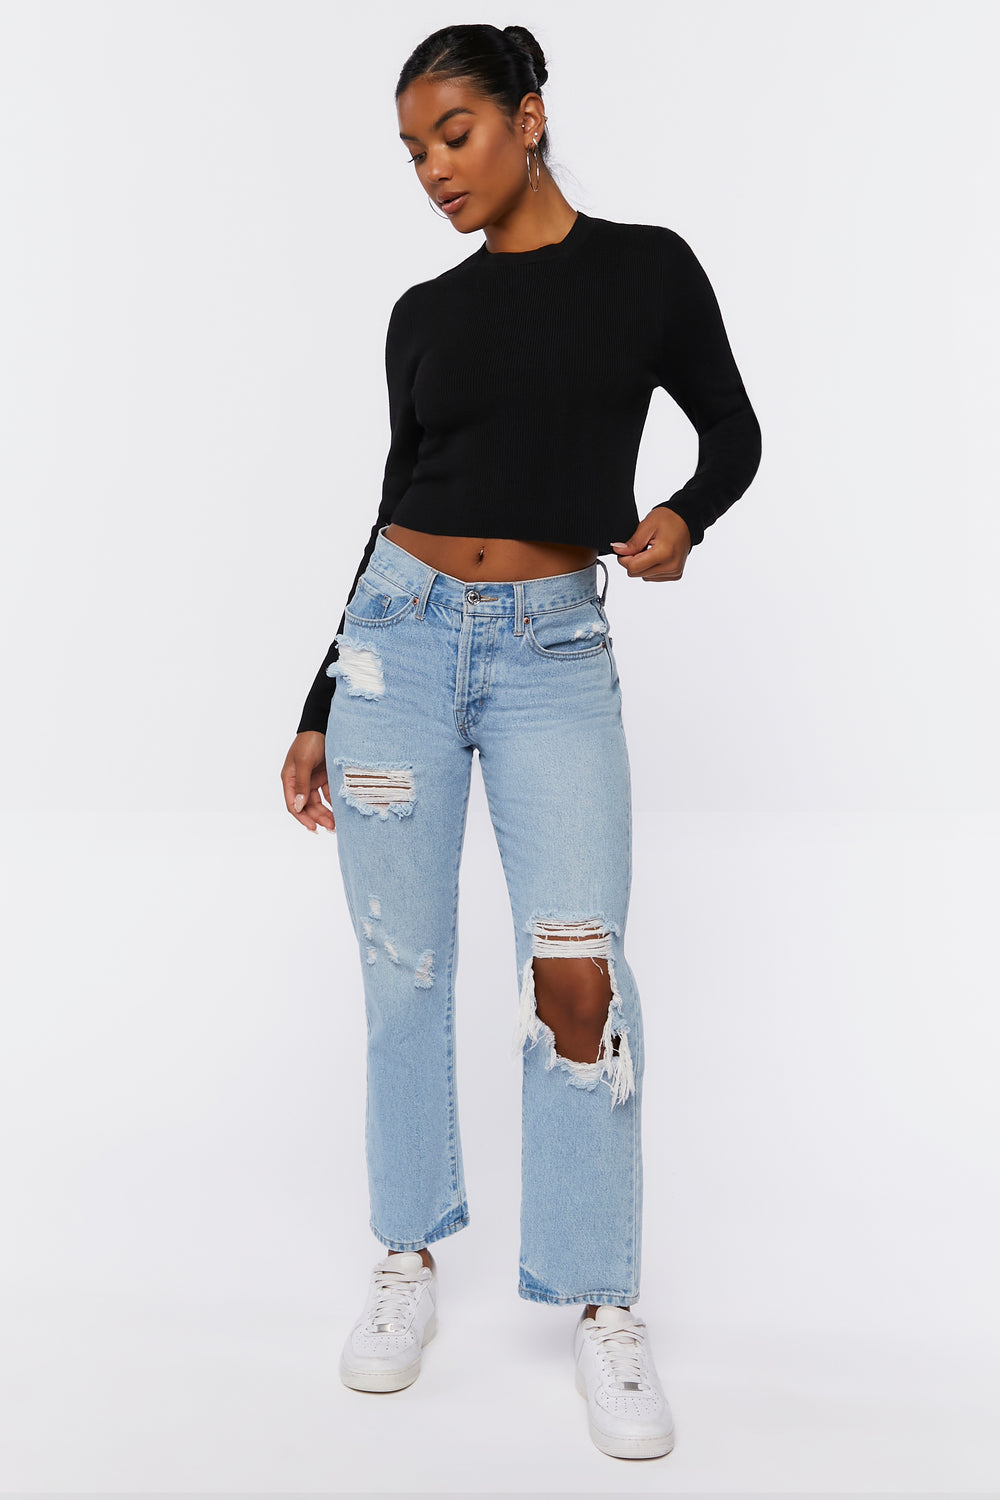 Ribbed Knit Sweater Top Black